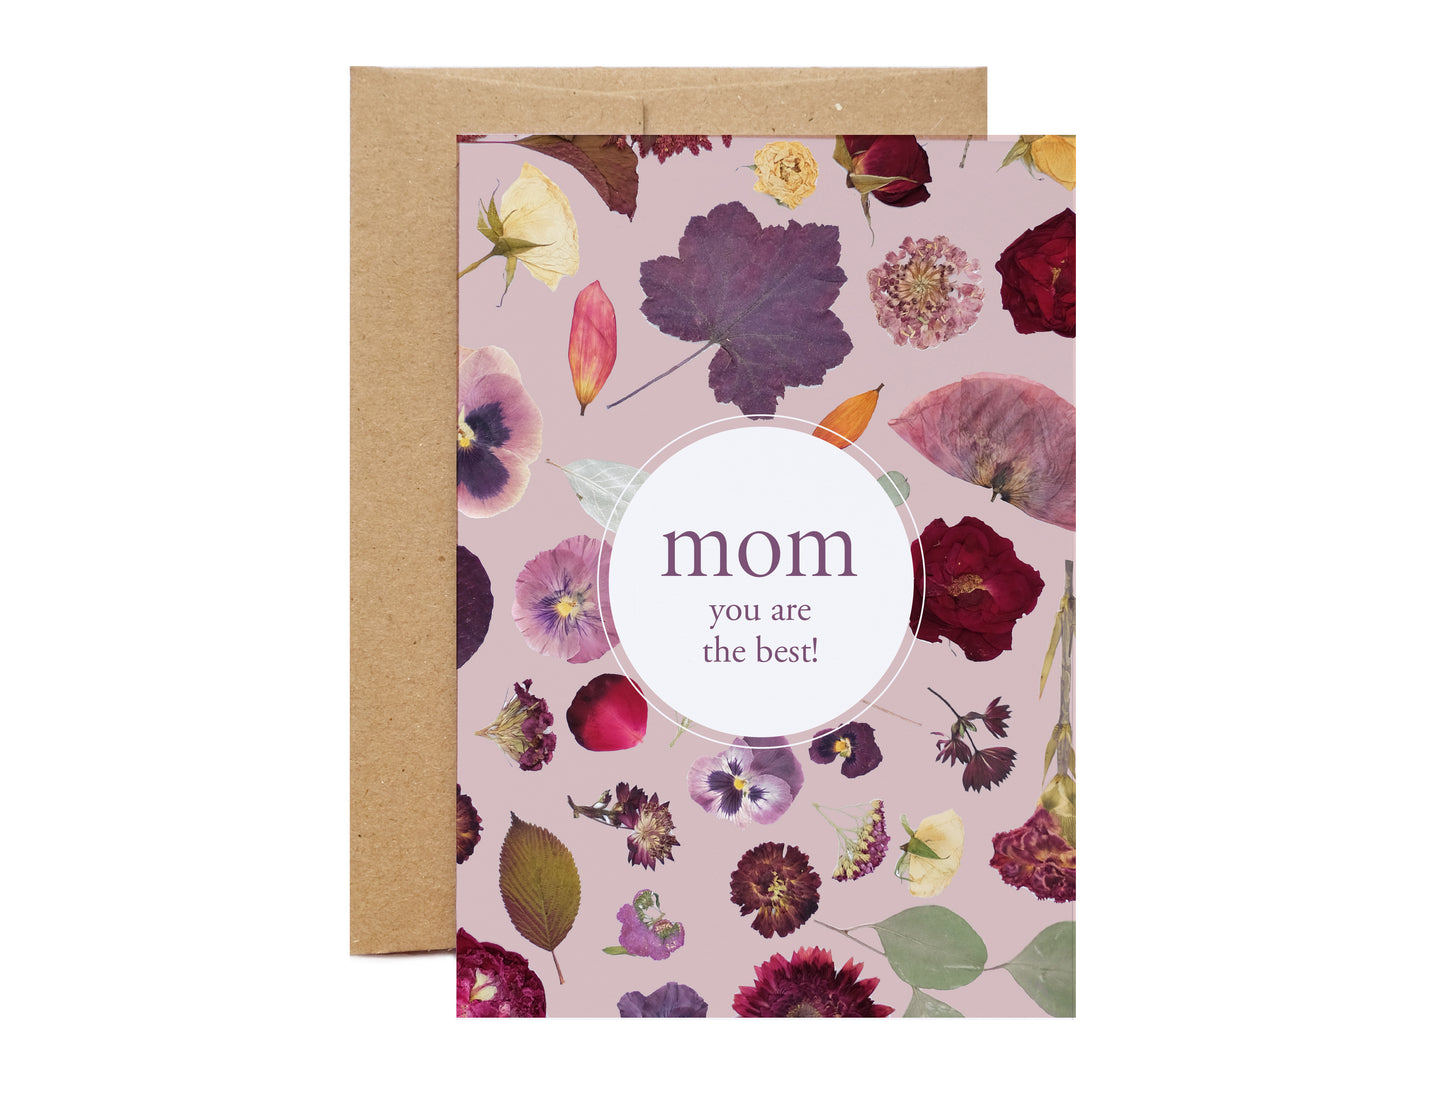 Mom you are the best, mother's day or everyday card for mom